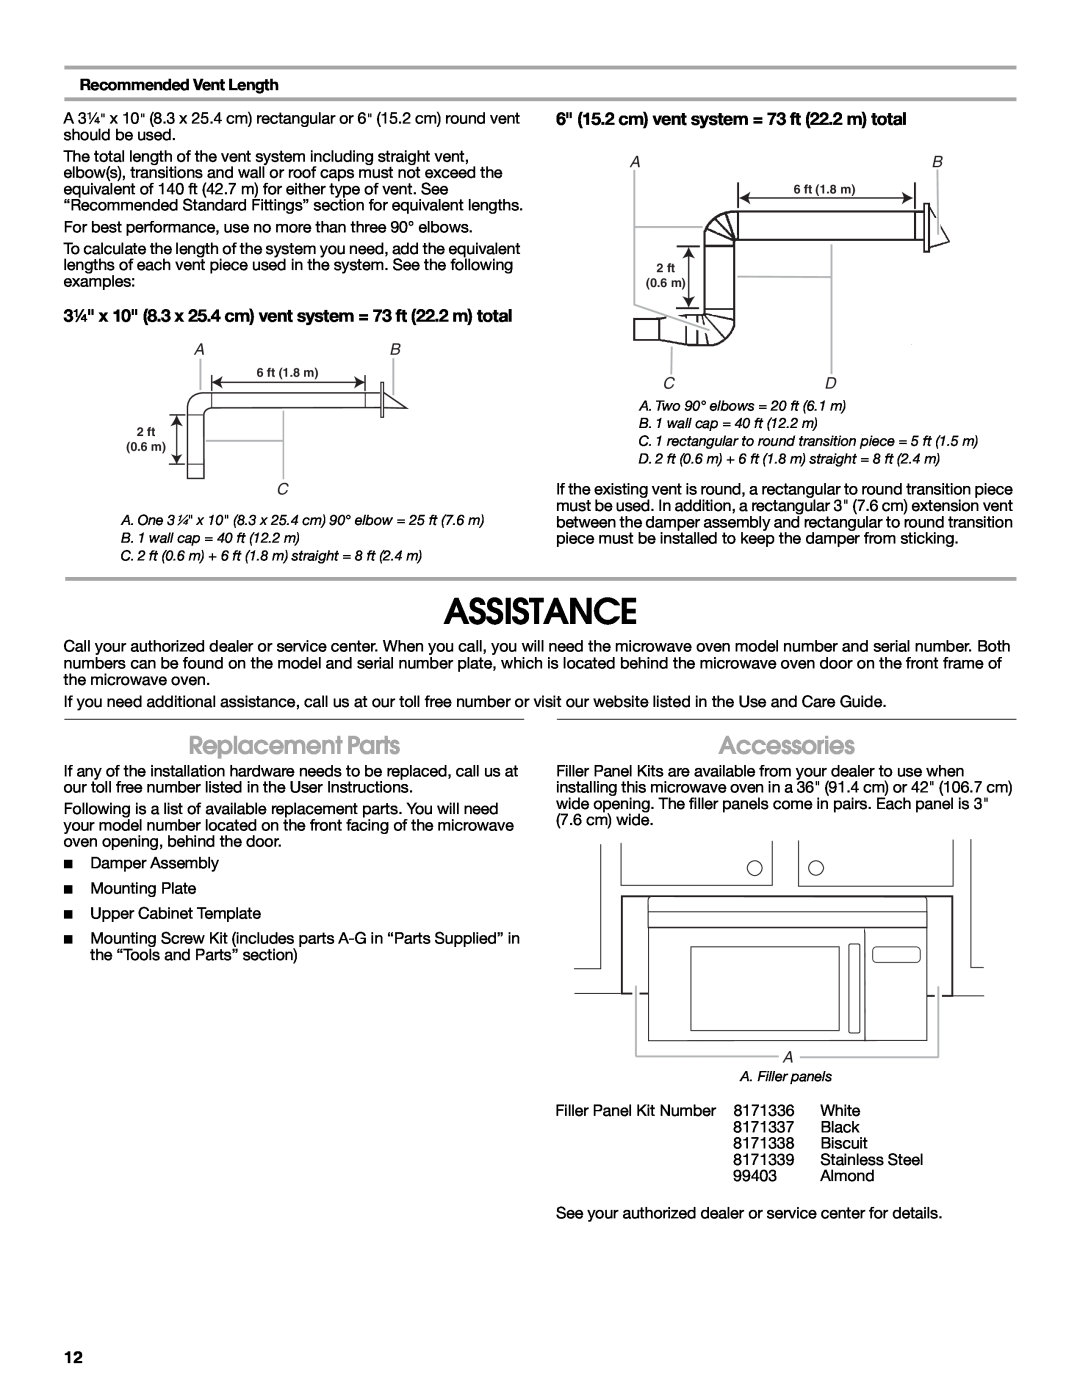 Maytag W10191953A installation instructions Assistance, Replacement Parts, Accessories, Recommended Vent Length 